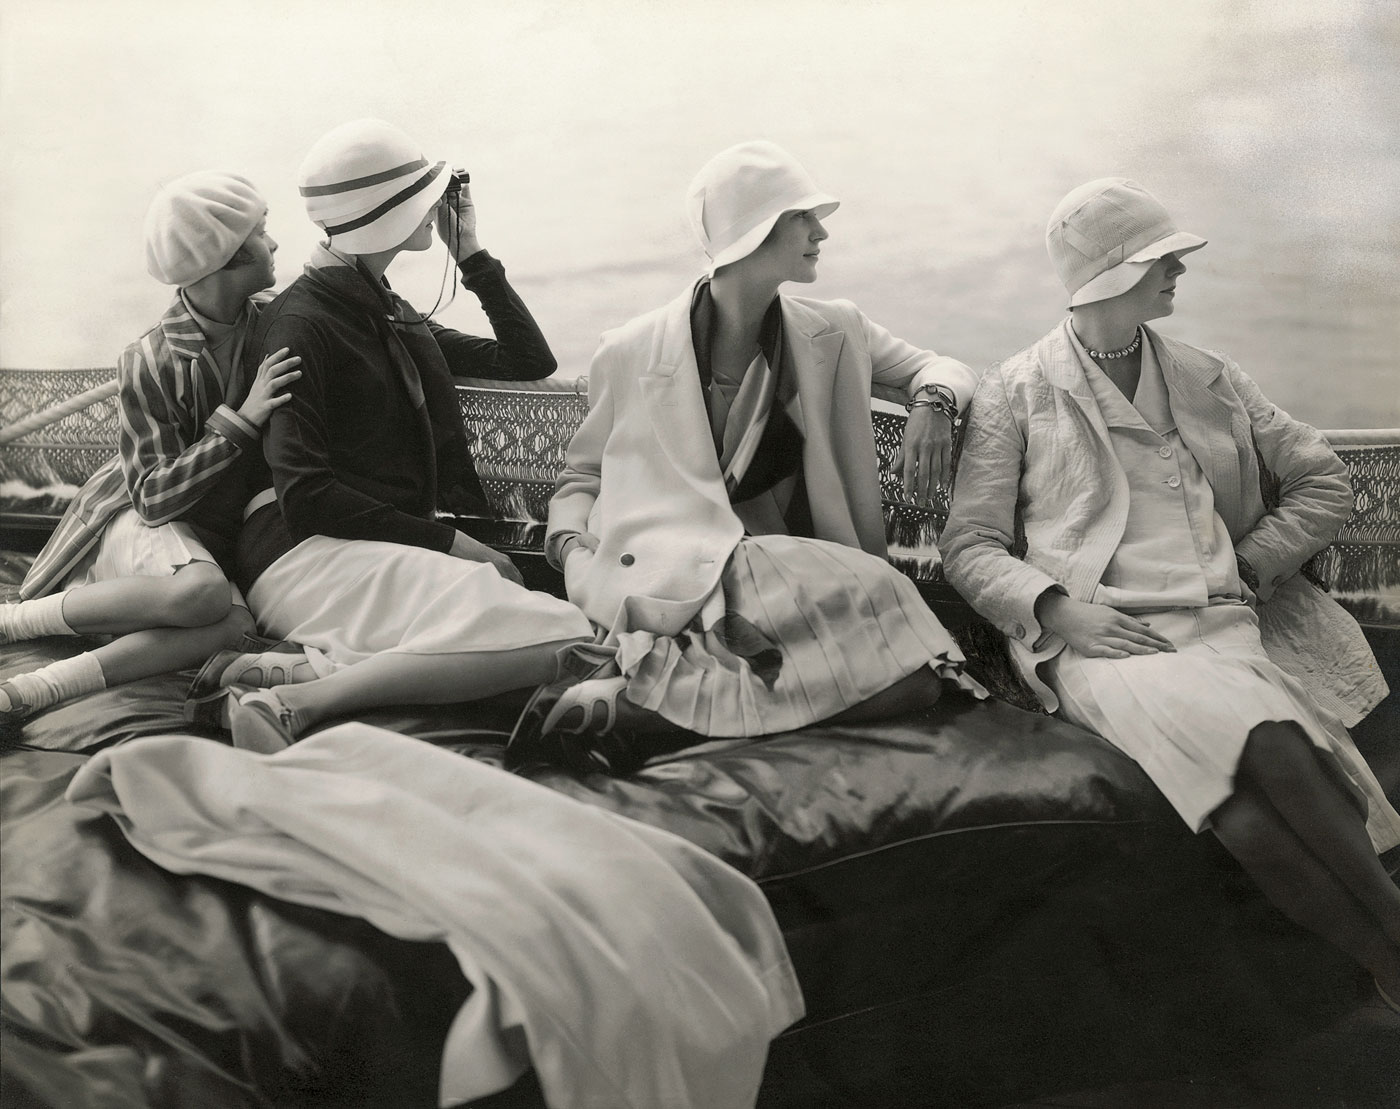 On George Baher’s yacht. June Cox wearing unidentified fashion; E. Vogt wearing fashion by Chanel and a hat by Reboux; Lee Miller wearing a dress by Mae and Hattie Green and a scarf by Chanel; Hanna-Lee Sherman wearing unidentified fashion, photo by Edward Steichen, 1928